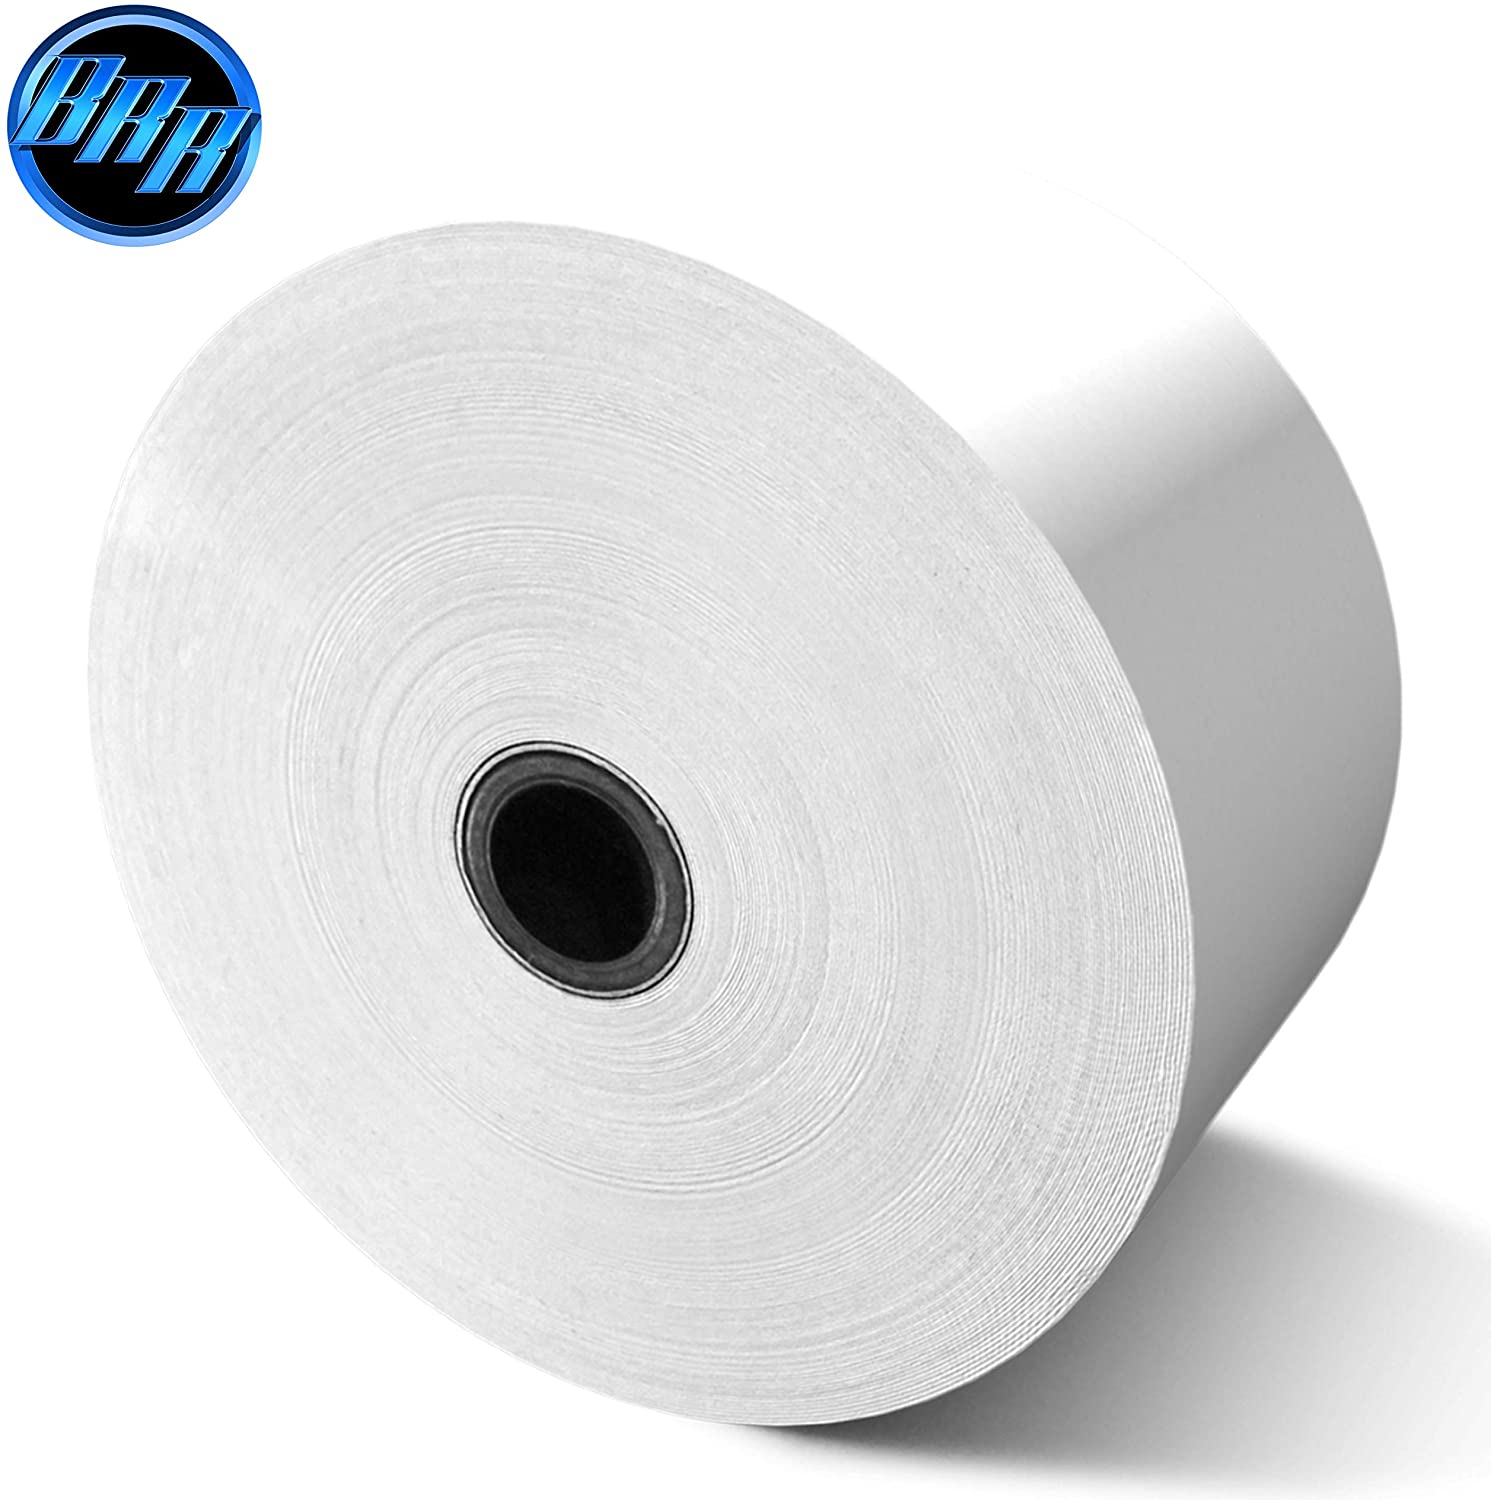 2-1/4” x 675' 8 Rolls Thermal Atm Receipt Paper Rolls (80 GSM Paper Thickness Core)